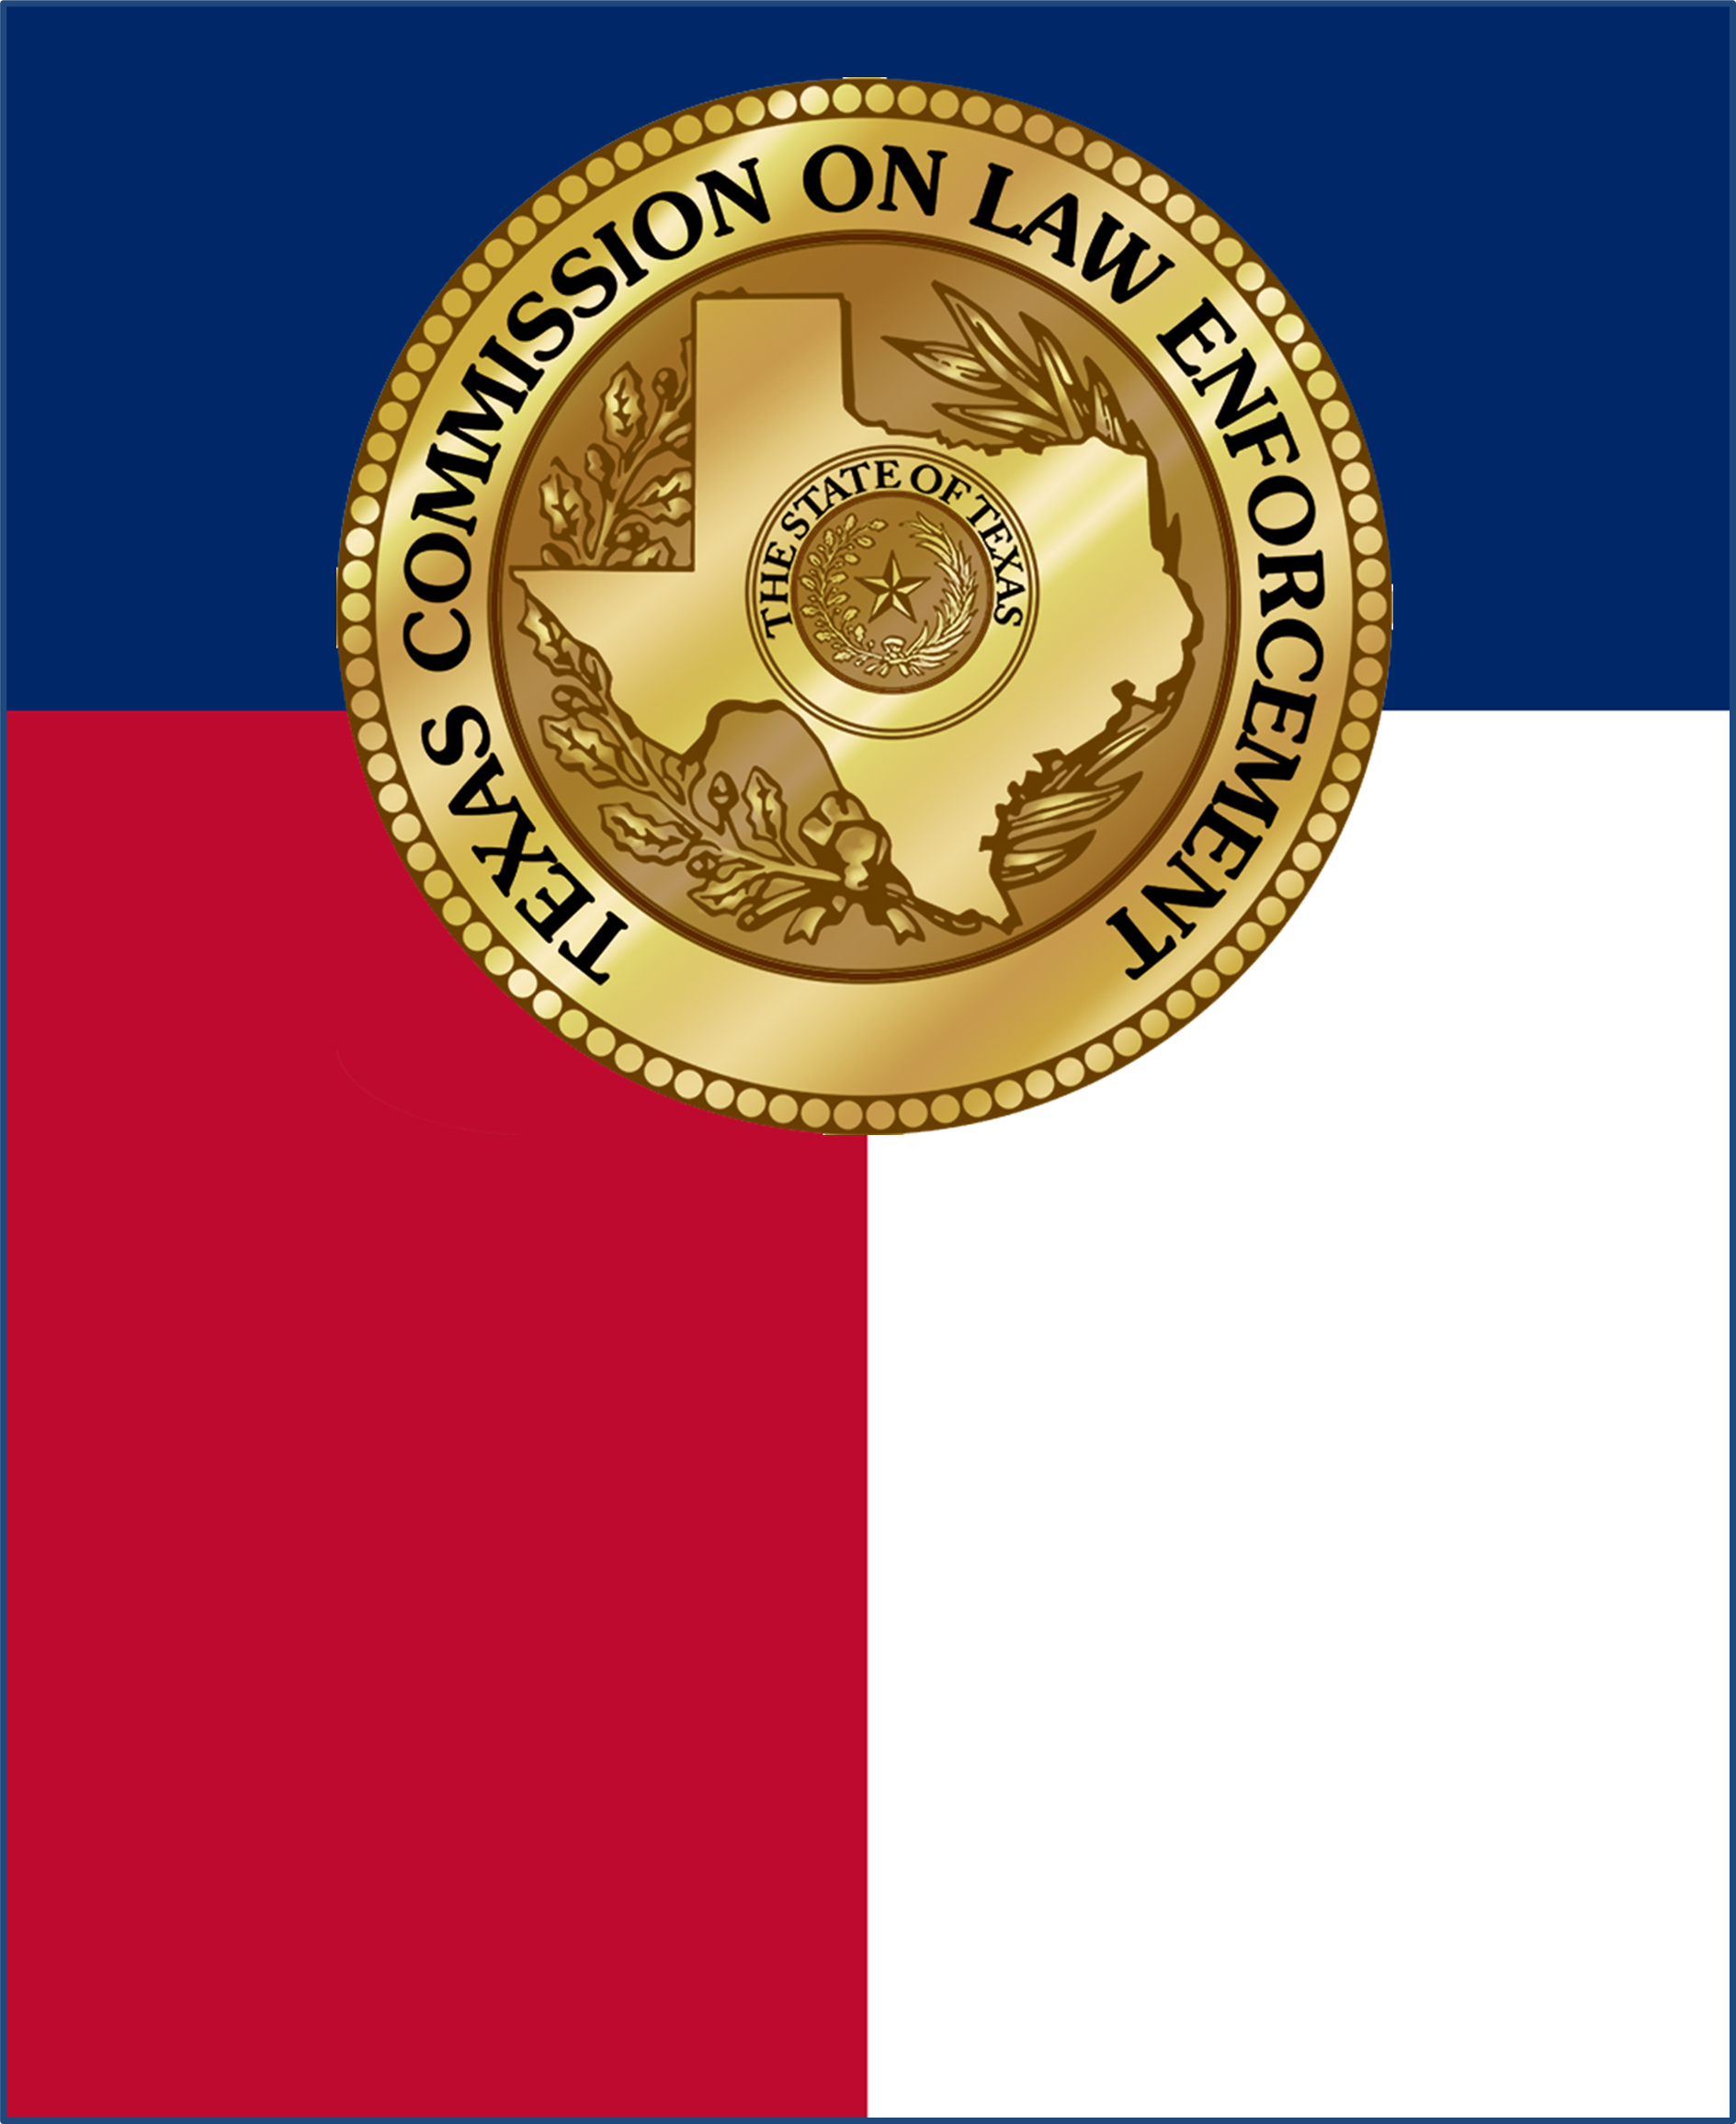 Texas Commission on Law Enforcement Flag Seal